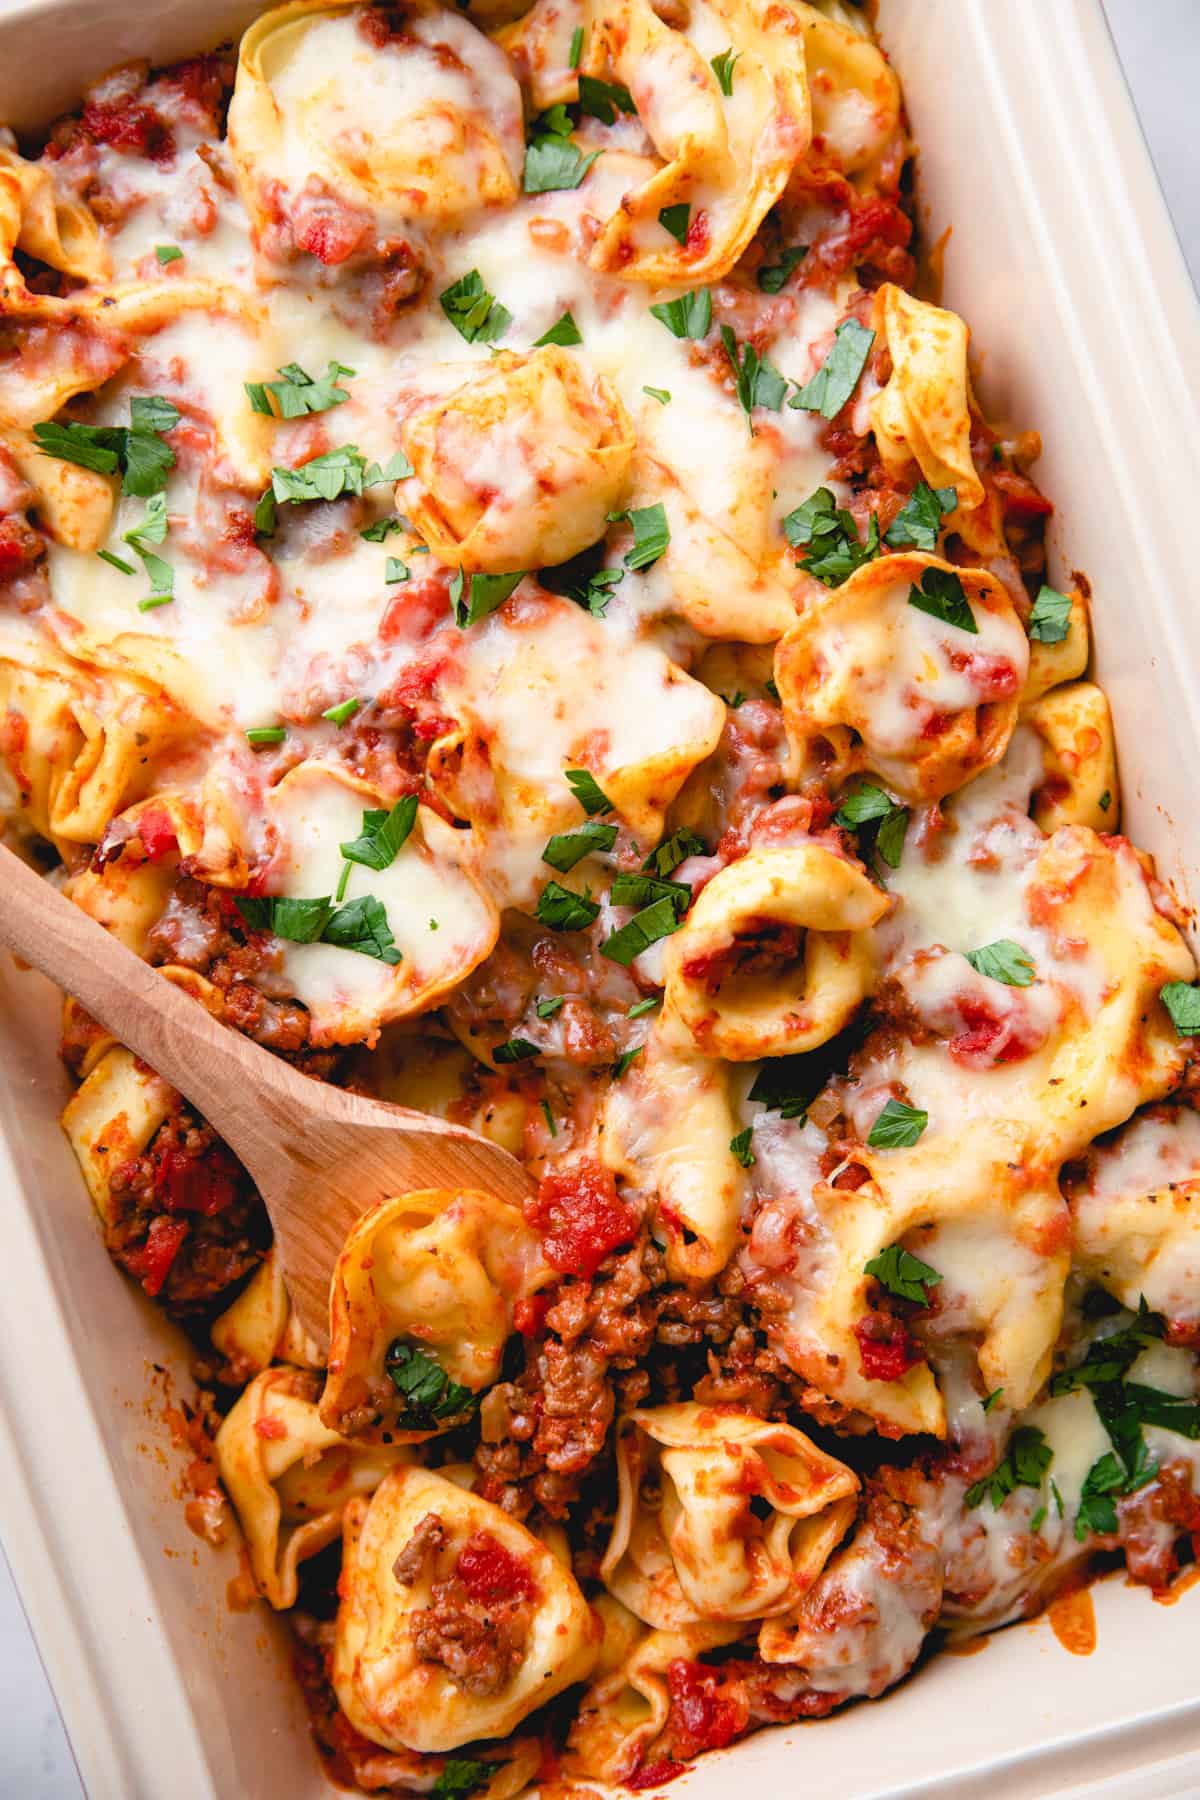 Tortellini with meat sauce and melted cheese in a baking dish with a wooden spoon.